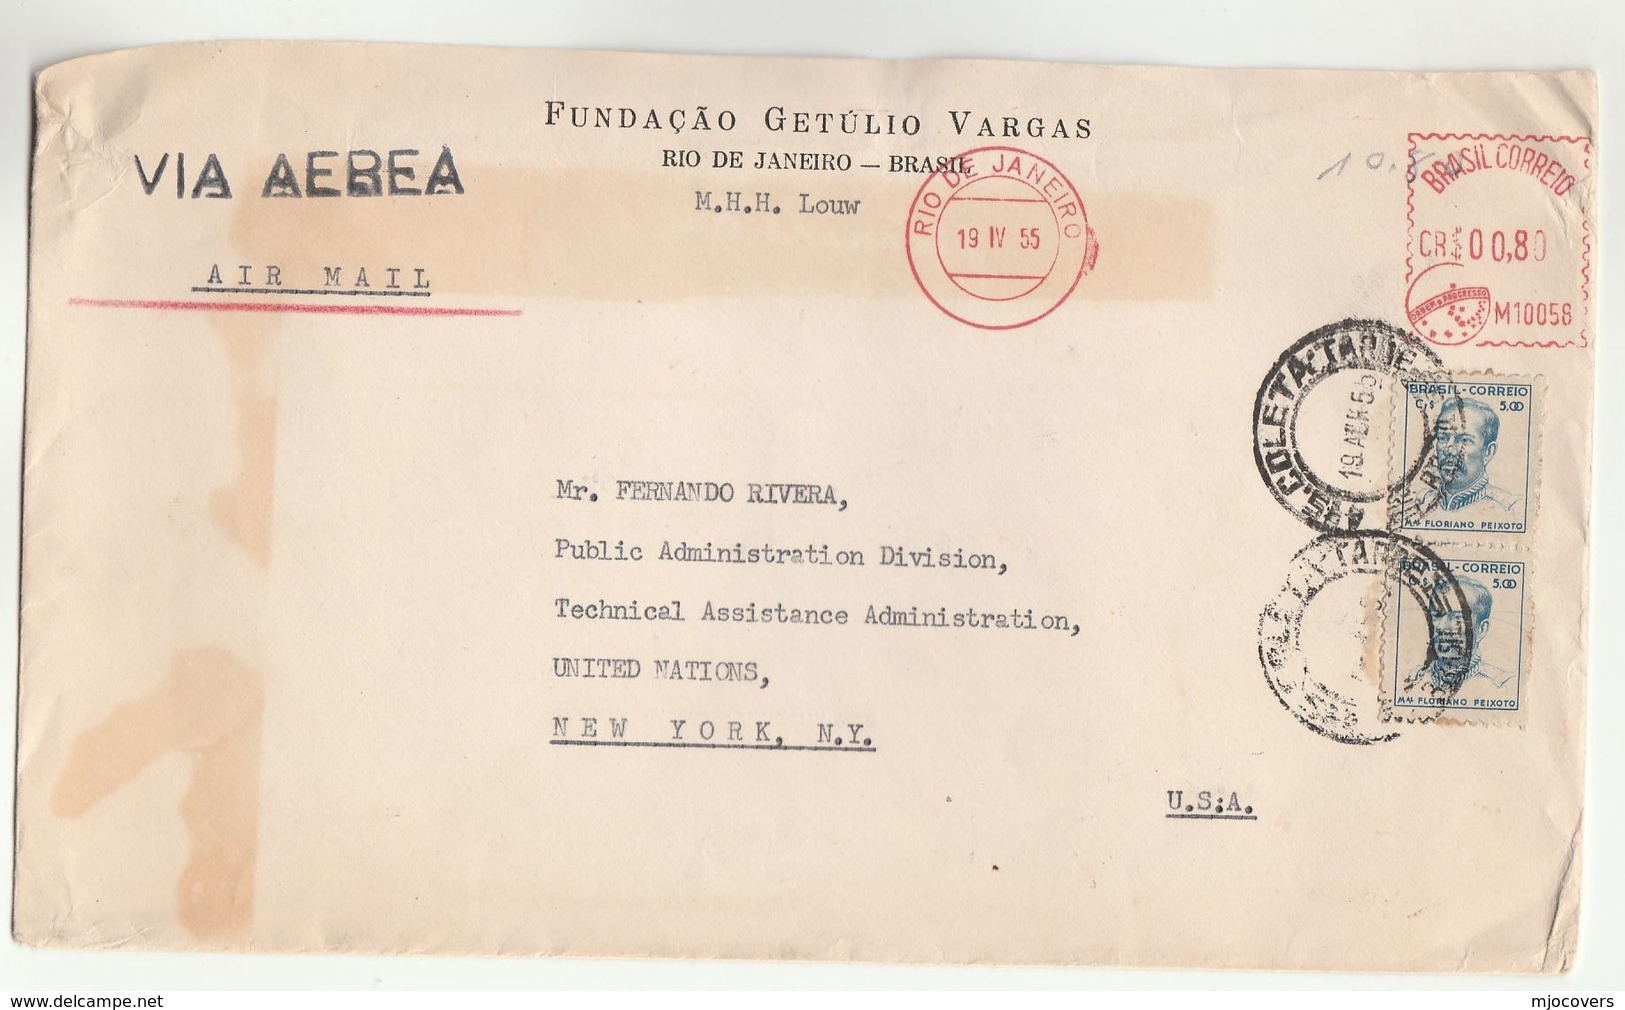 1955 BRAZIL Getulio Vargas Foundation To UN NY USA Franked Meter & Stamps COVER United Nations Airmail - Covers & Documents